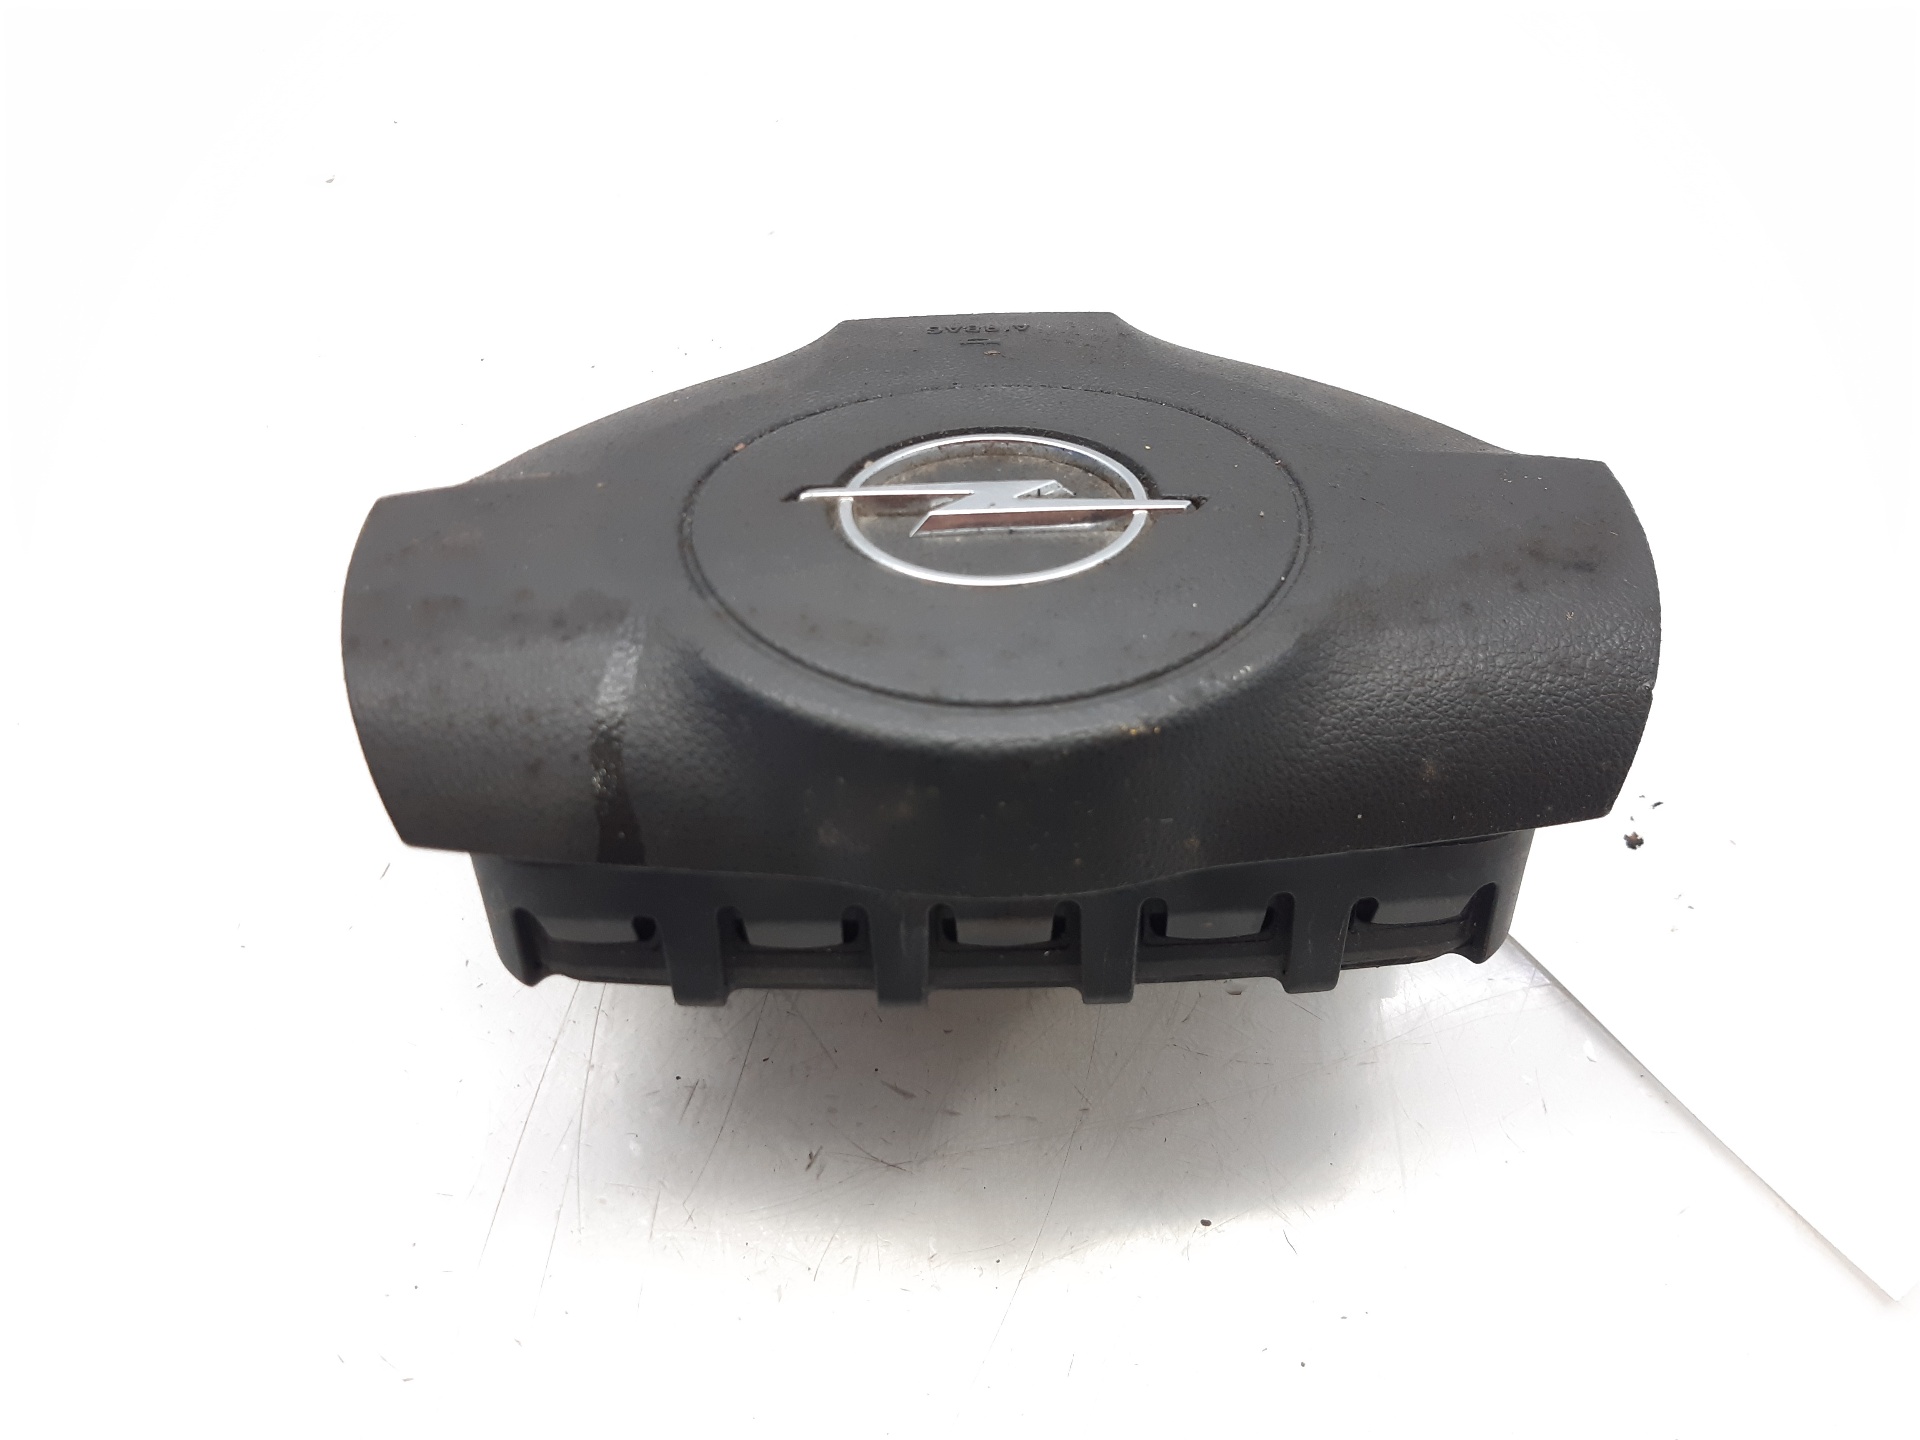 OPEL Vectra C (2002-2005) Other Control Units 13203886 18693045